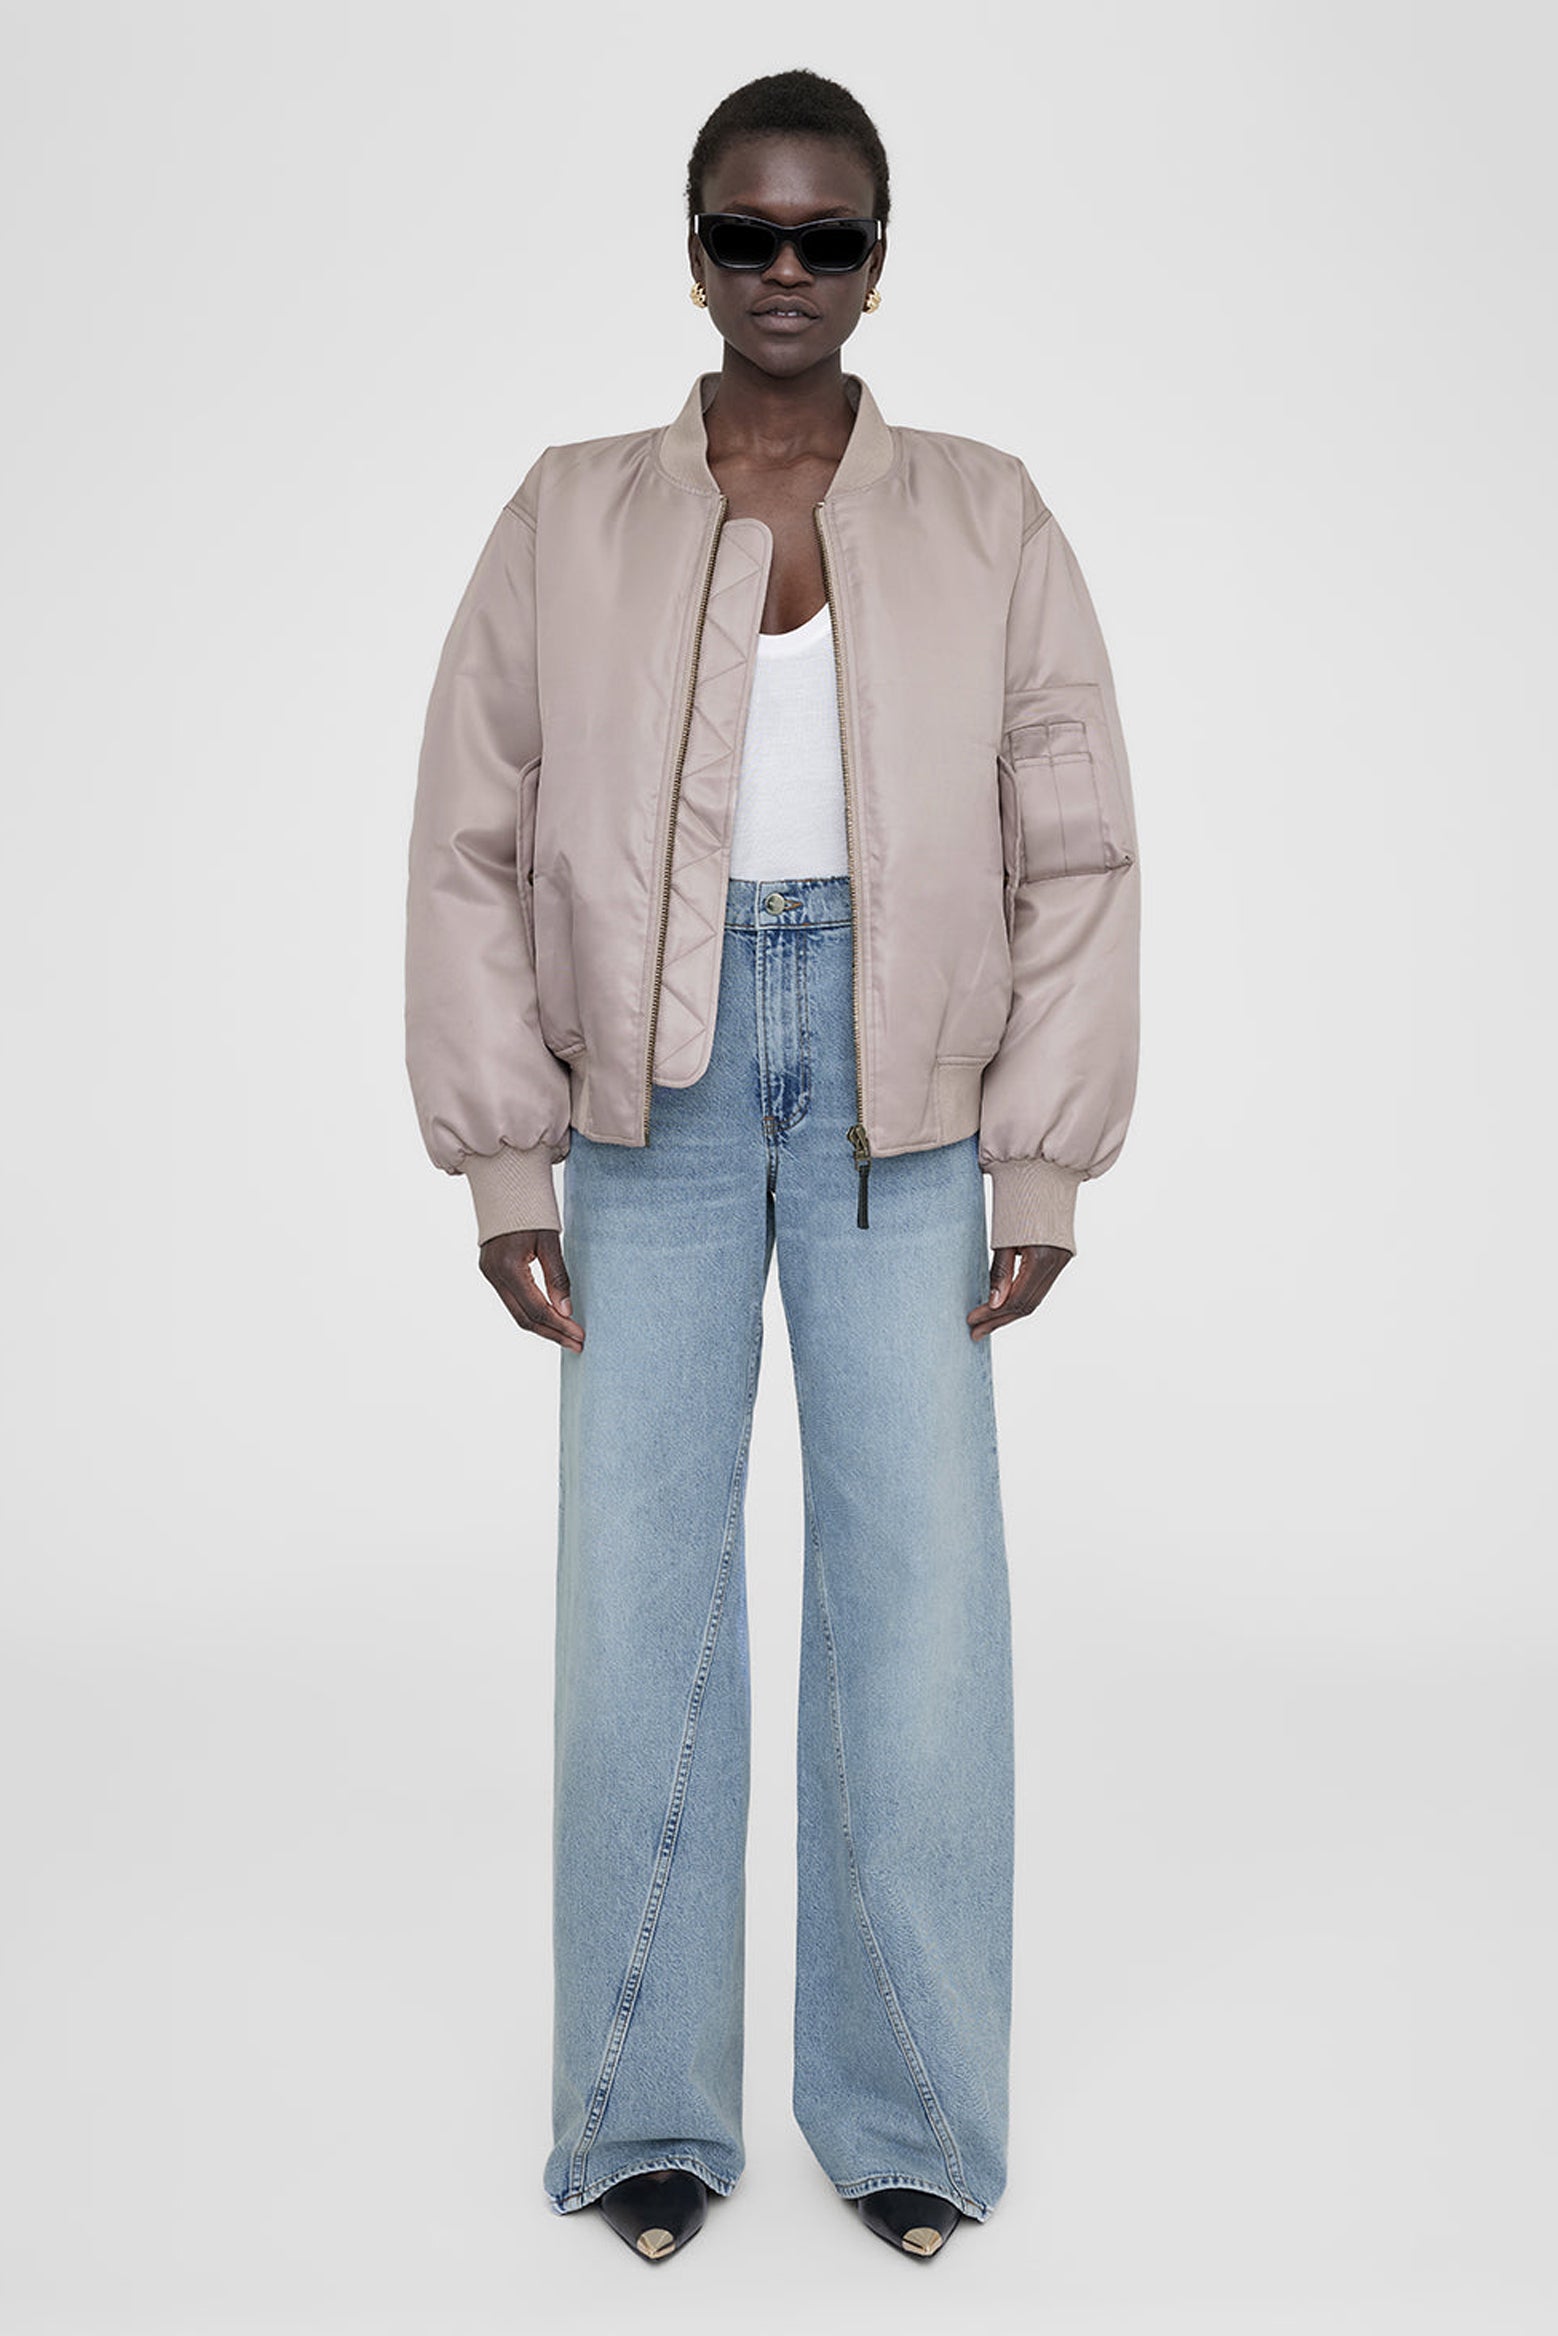 The Anine Bing Leon Bomber in Champagne available at The New Trend Australia